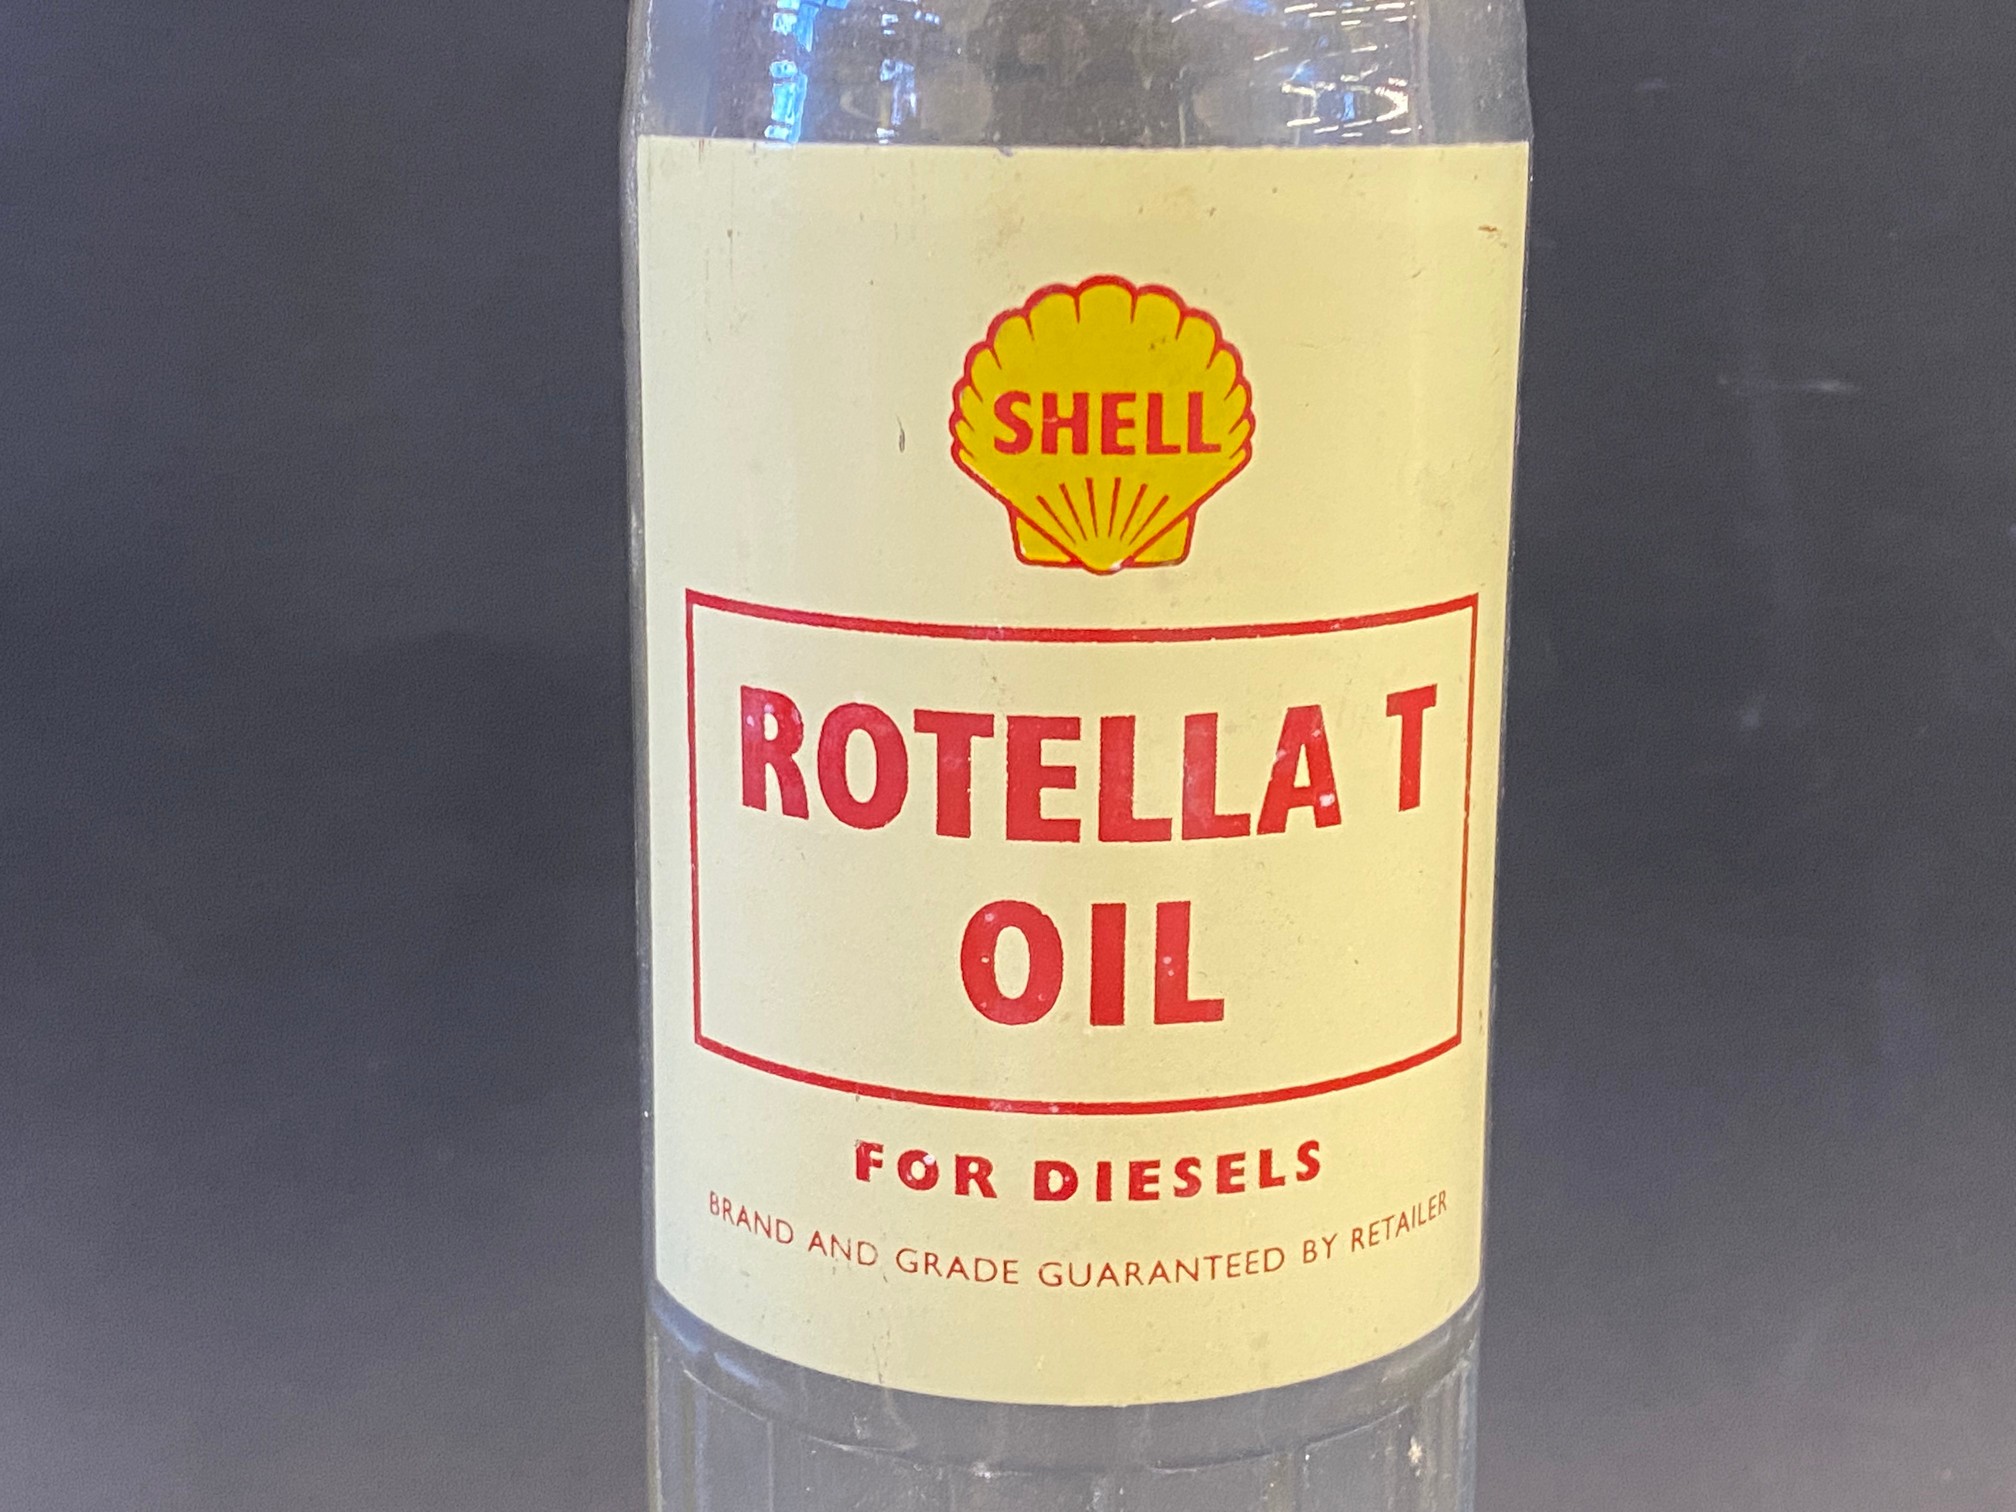 A Shell Rotella T Oil glass bottle. - Image 3 of 3